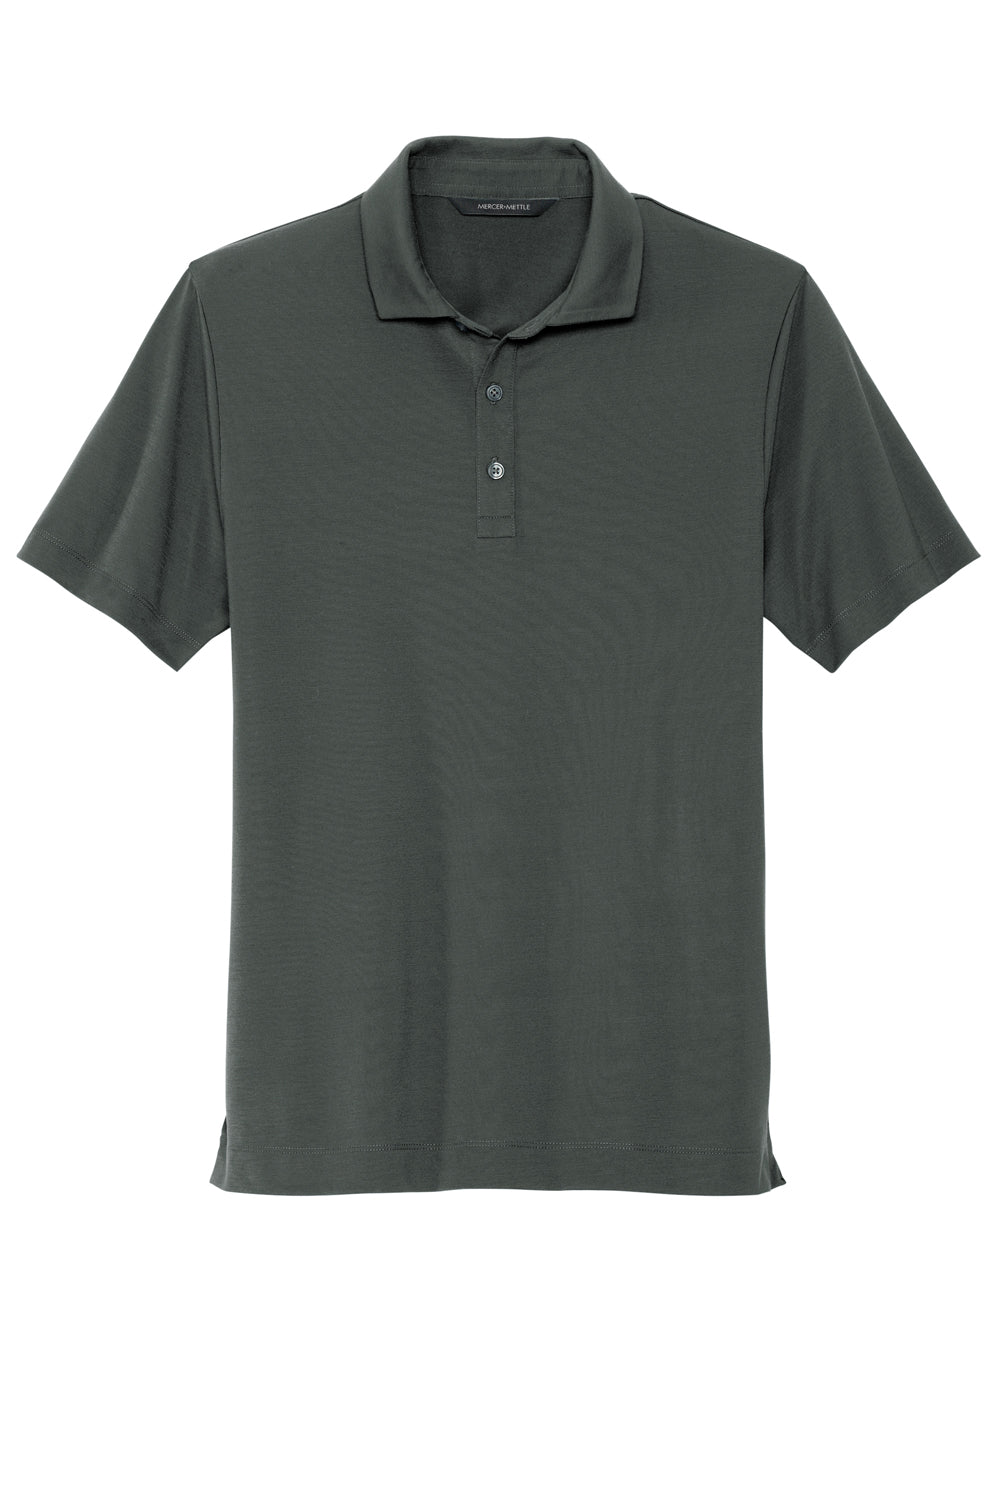 Mercer+Mettle MM1014 Stretch Jersey Short Sleeve Polo Shirt Anchor Grey Flat Front